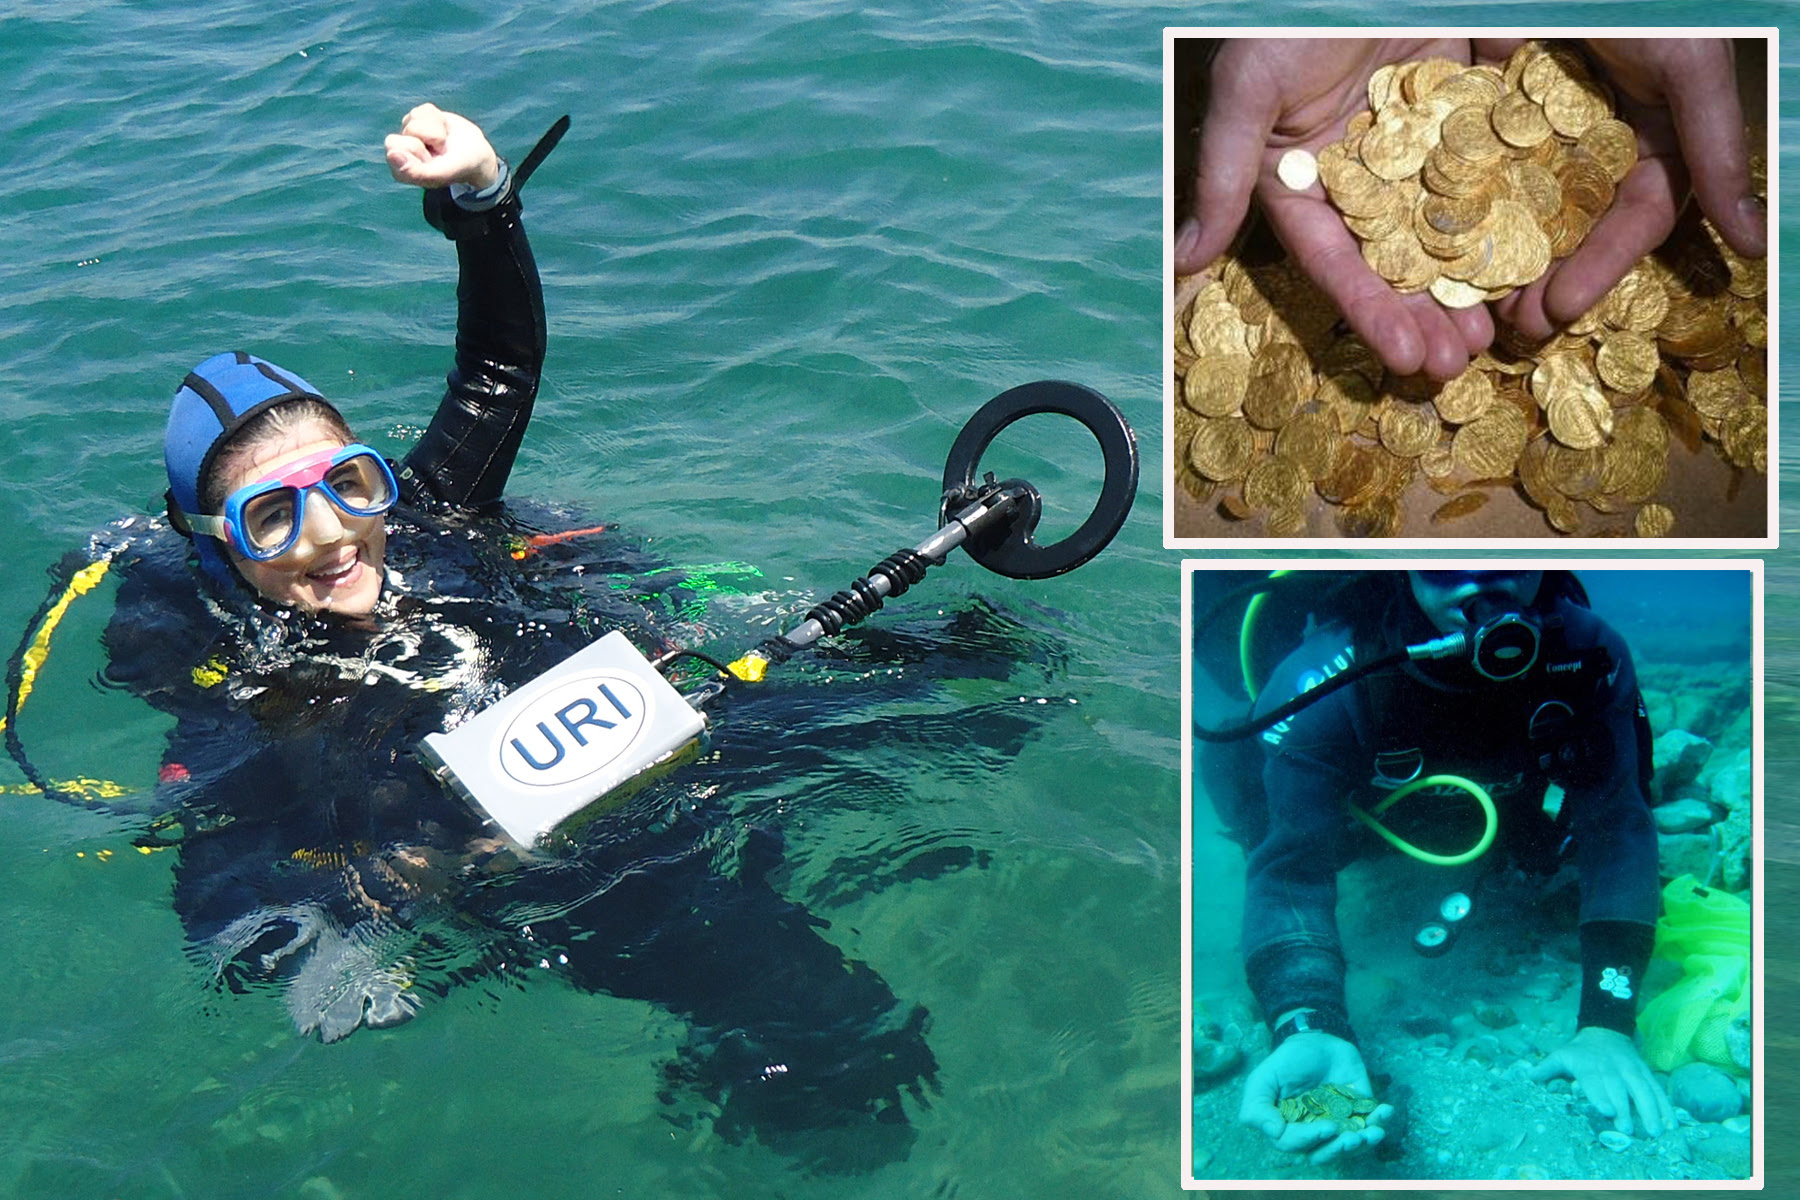 Main photo: Dr. Bridget Buxton of URI with JW Fishers Pulse 8X detector; Bottom inset: Diver with hand full of recovered coins; Top inset: Some of the 2,000 gold coins found off the Israeli coast